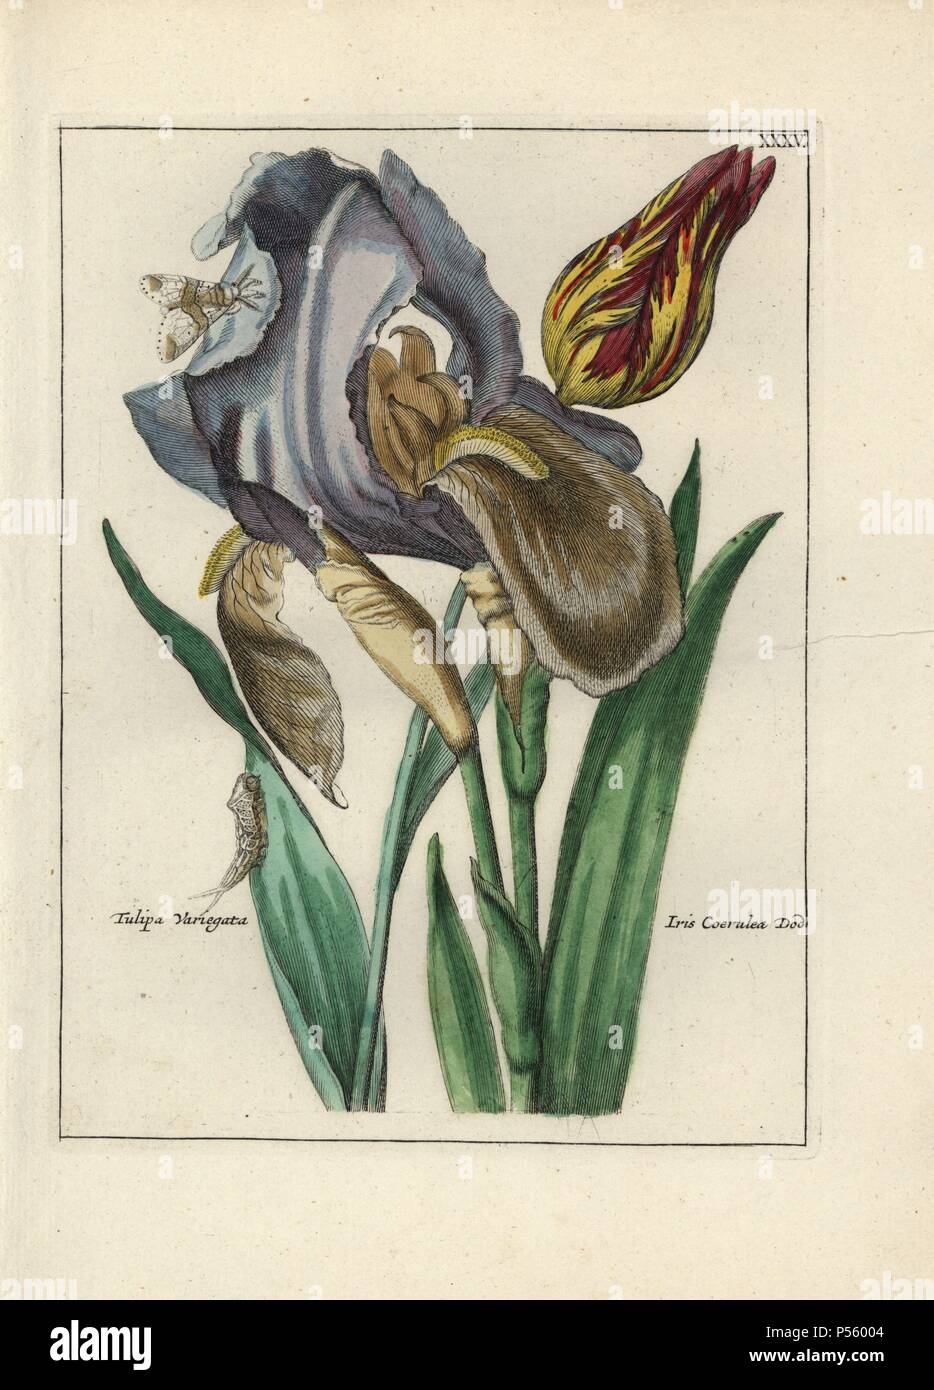 Variegated tulip, Tulipa variegata, and blue flag, Iris coerulea Dod, with moth and caterpillar. Handcoloured copperplate botanical engraving from 'Nederlandsch Bloemwerk' (Dutch Flower Arrangements), Amsterdam, J.B. Elwe, 1794. Illustration copied from a work by one of the outstanding French flower painters of the 17th century, Nicolas Robert (1614-1685), entitled 'Variae ac multiformes florum species.. Diverses fleurs,' Paris, 1660. Stock Photo